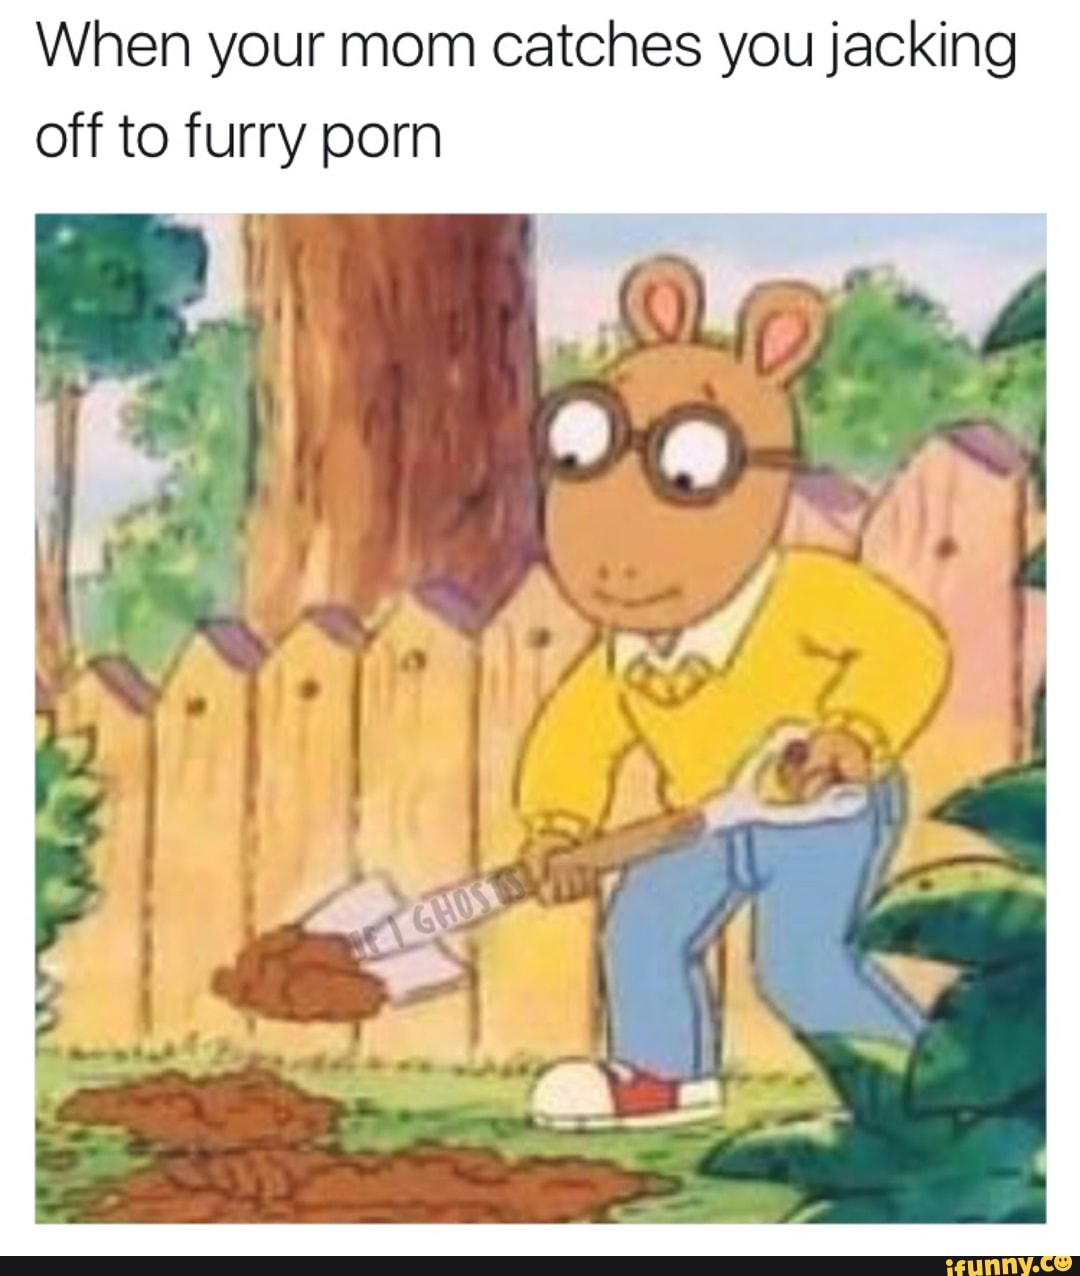 Furry Mom Porn - When your mom catches you jacking off to furry porn - iFunny :)